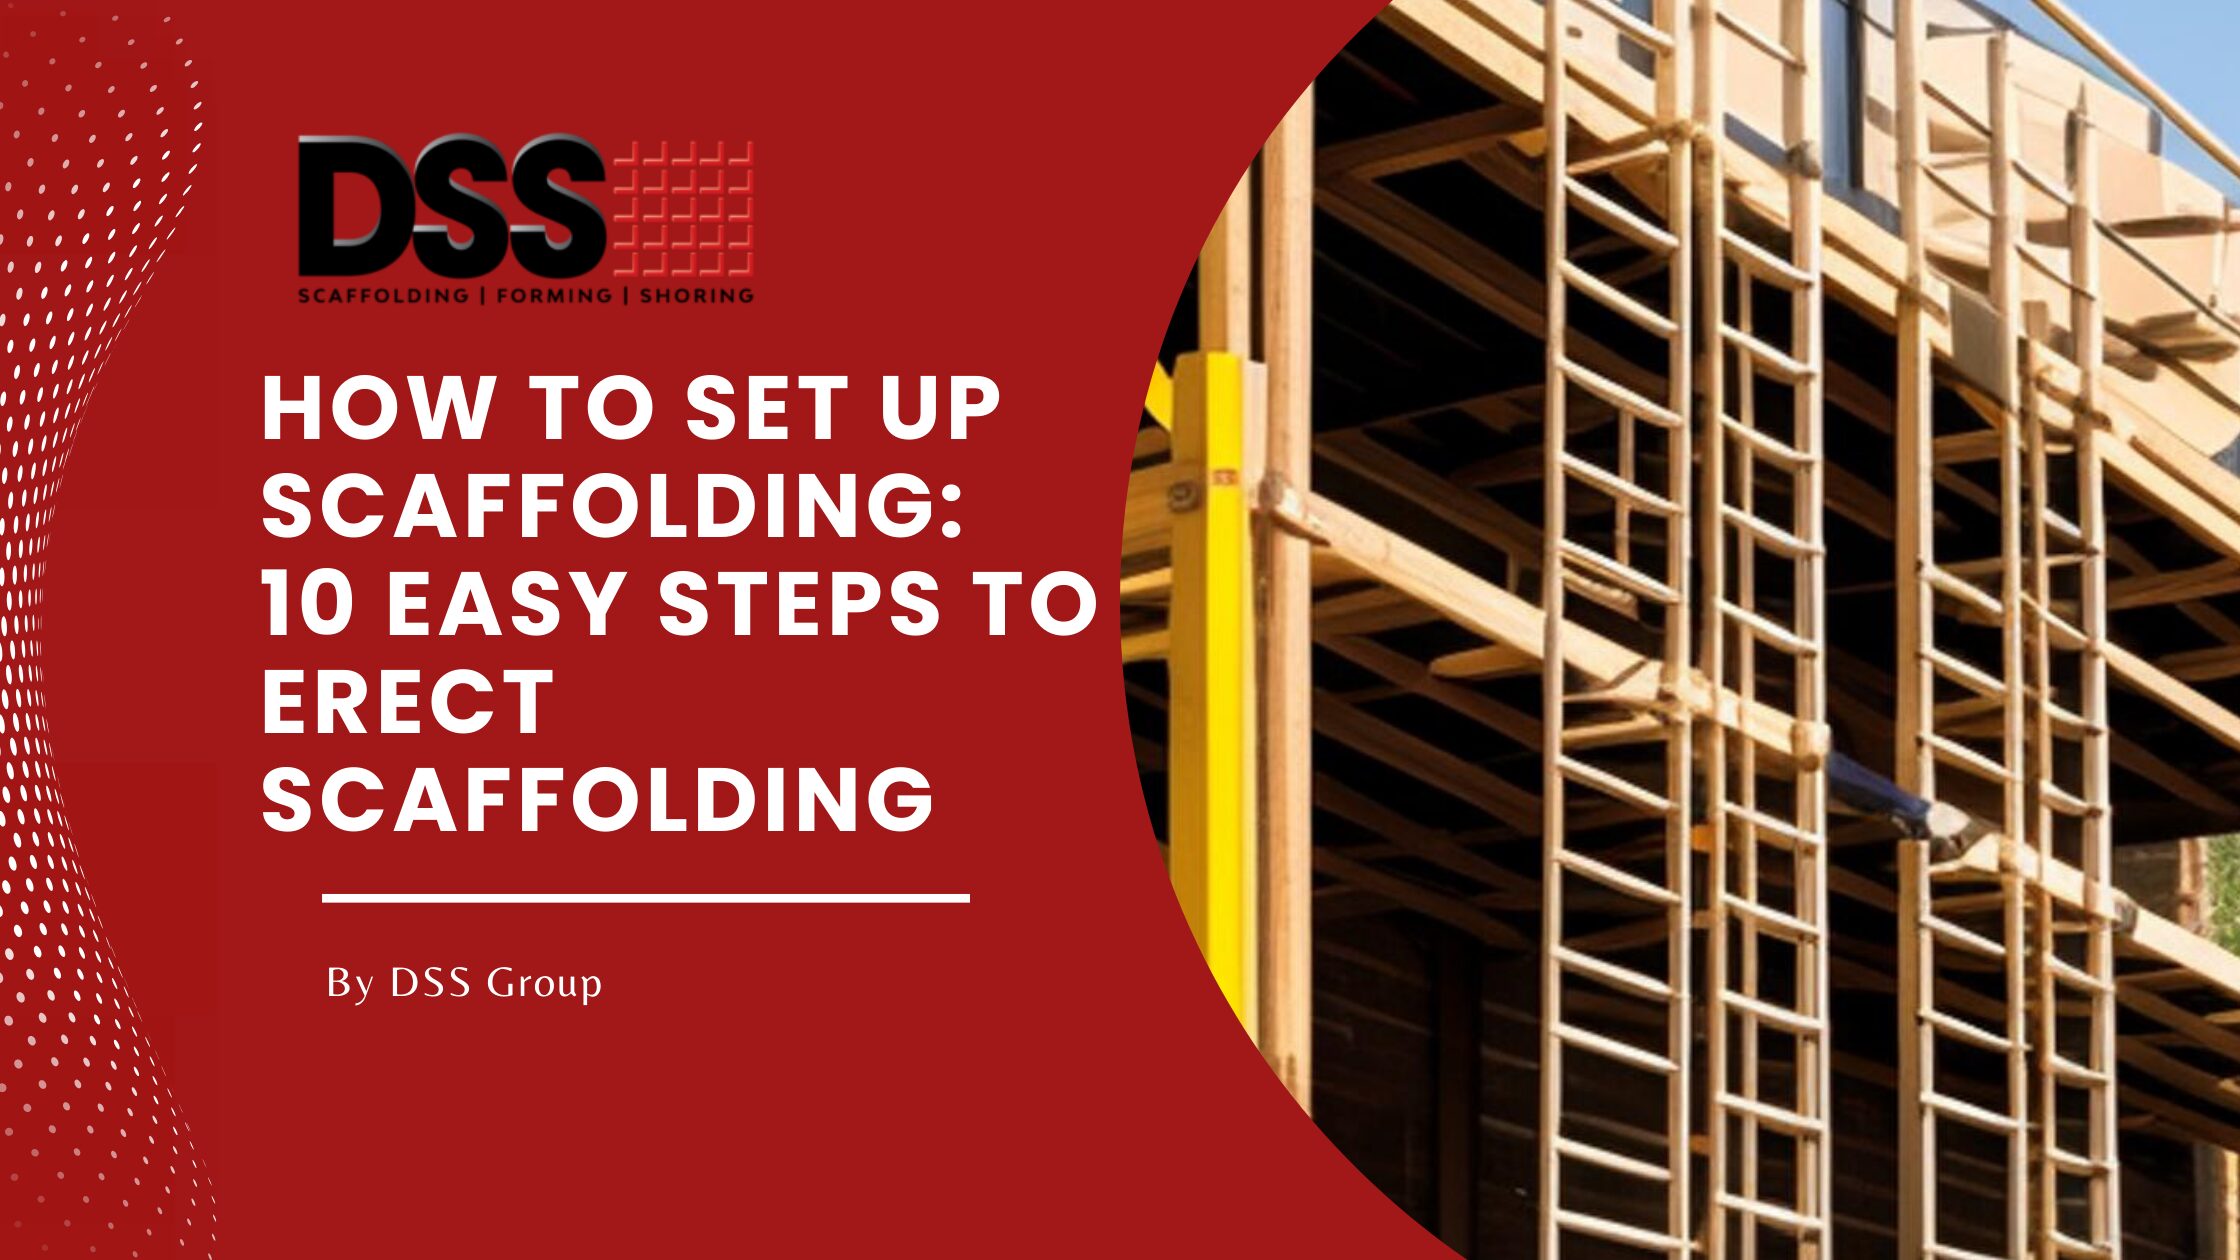 How to set up scaffolding